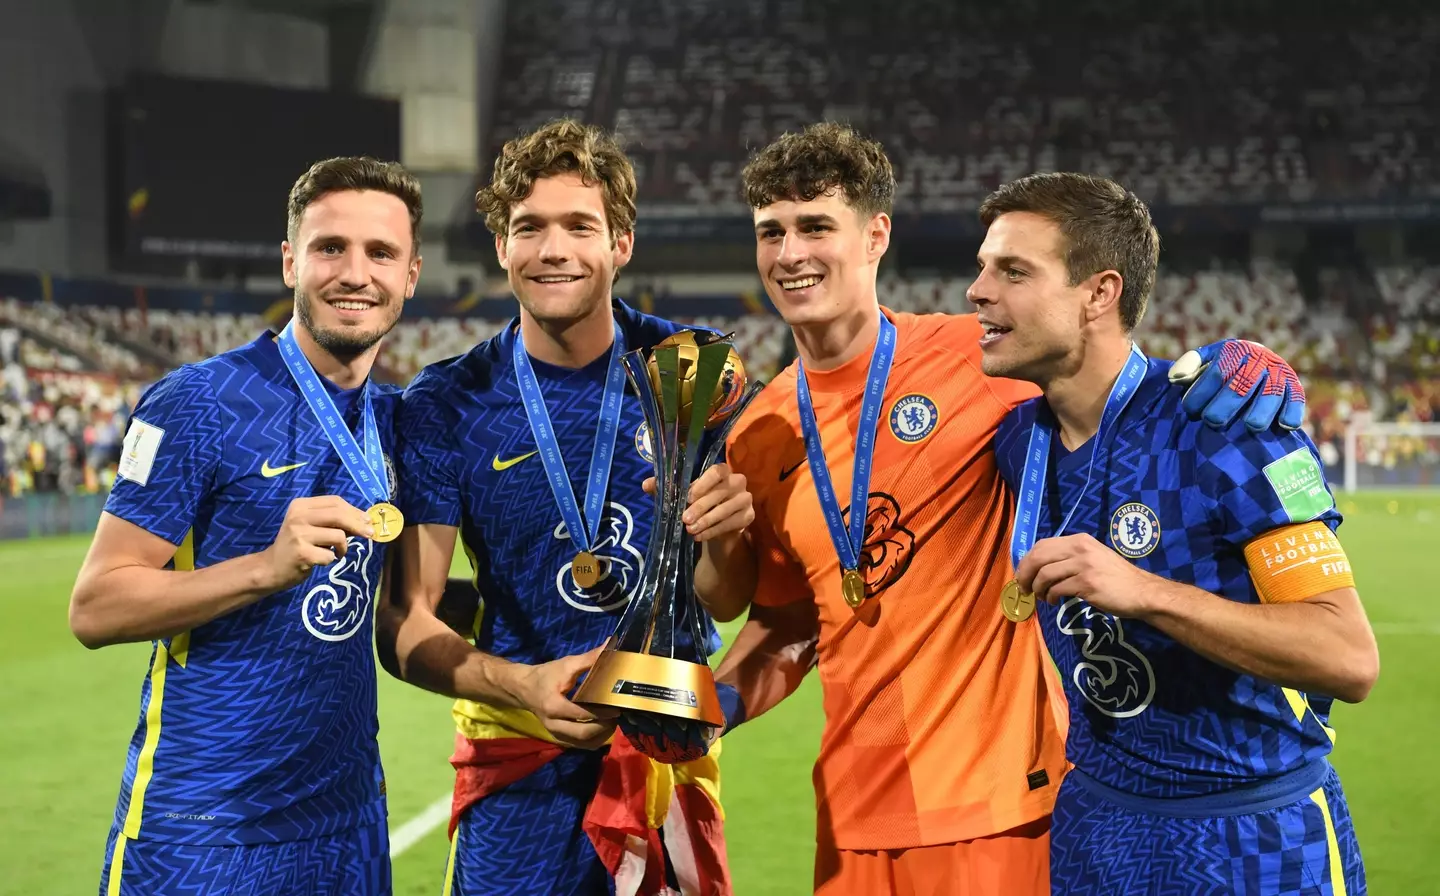 Chelsea's Saul Niguez, Marcos Alonso, Kepa Arrizabalaga and Cesar Azpilicueta celebrate with their winner's medals after the FIFA Club World Cup Final match. (Alamy)